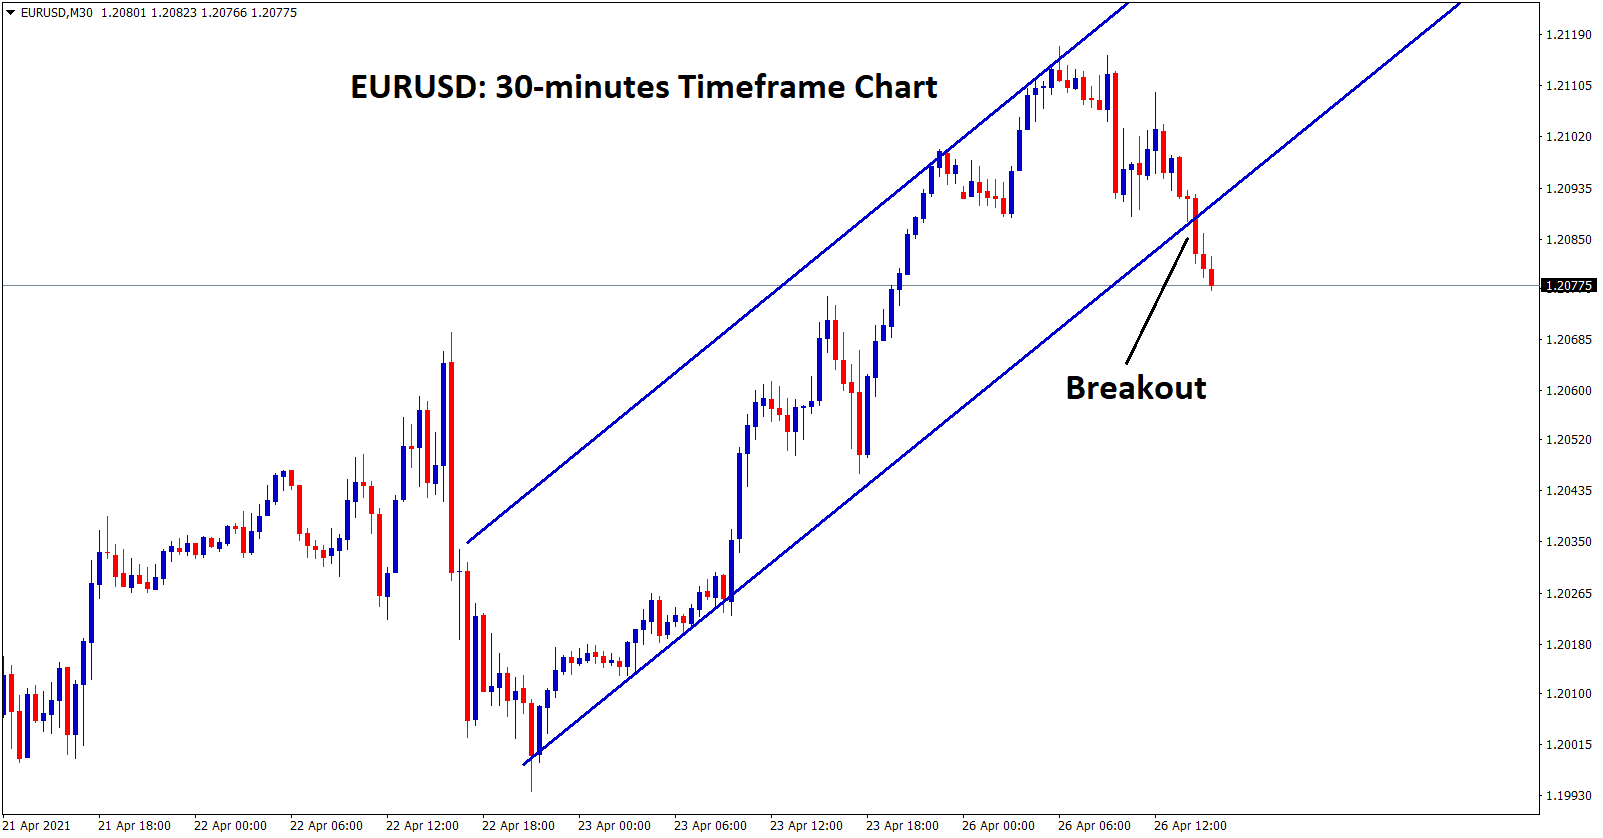 eurusd breakout the bottom level of the uptrend line in the 30 min chart